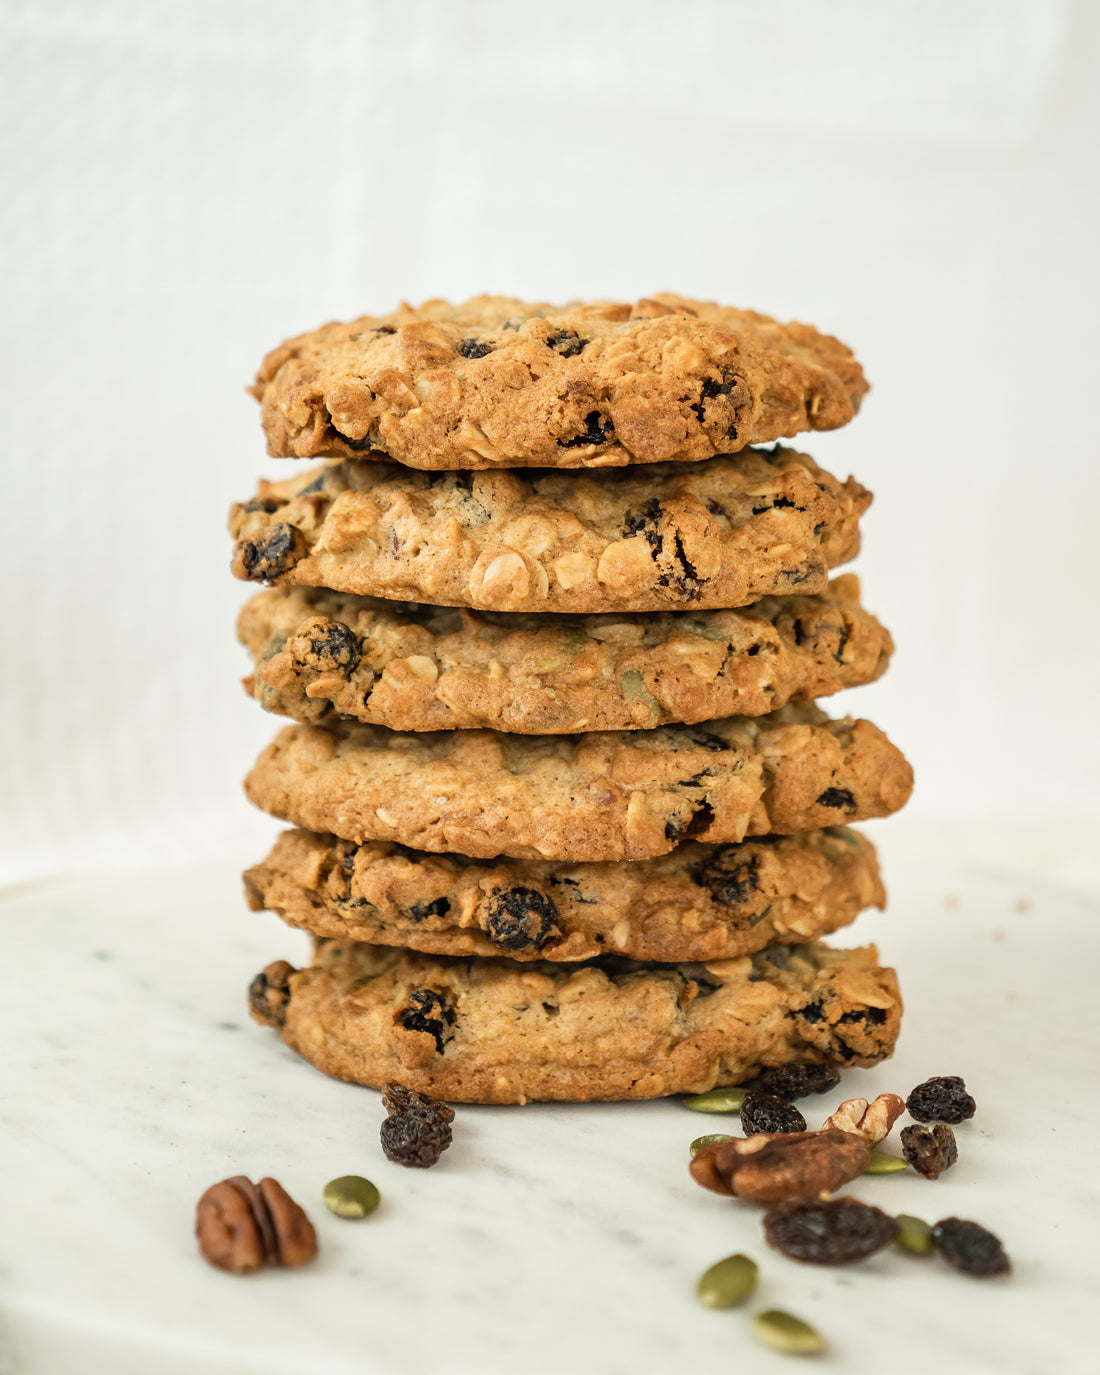 Breakfast Cookies with Oats, Raisins, Nuts and Seeds